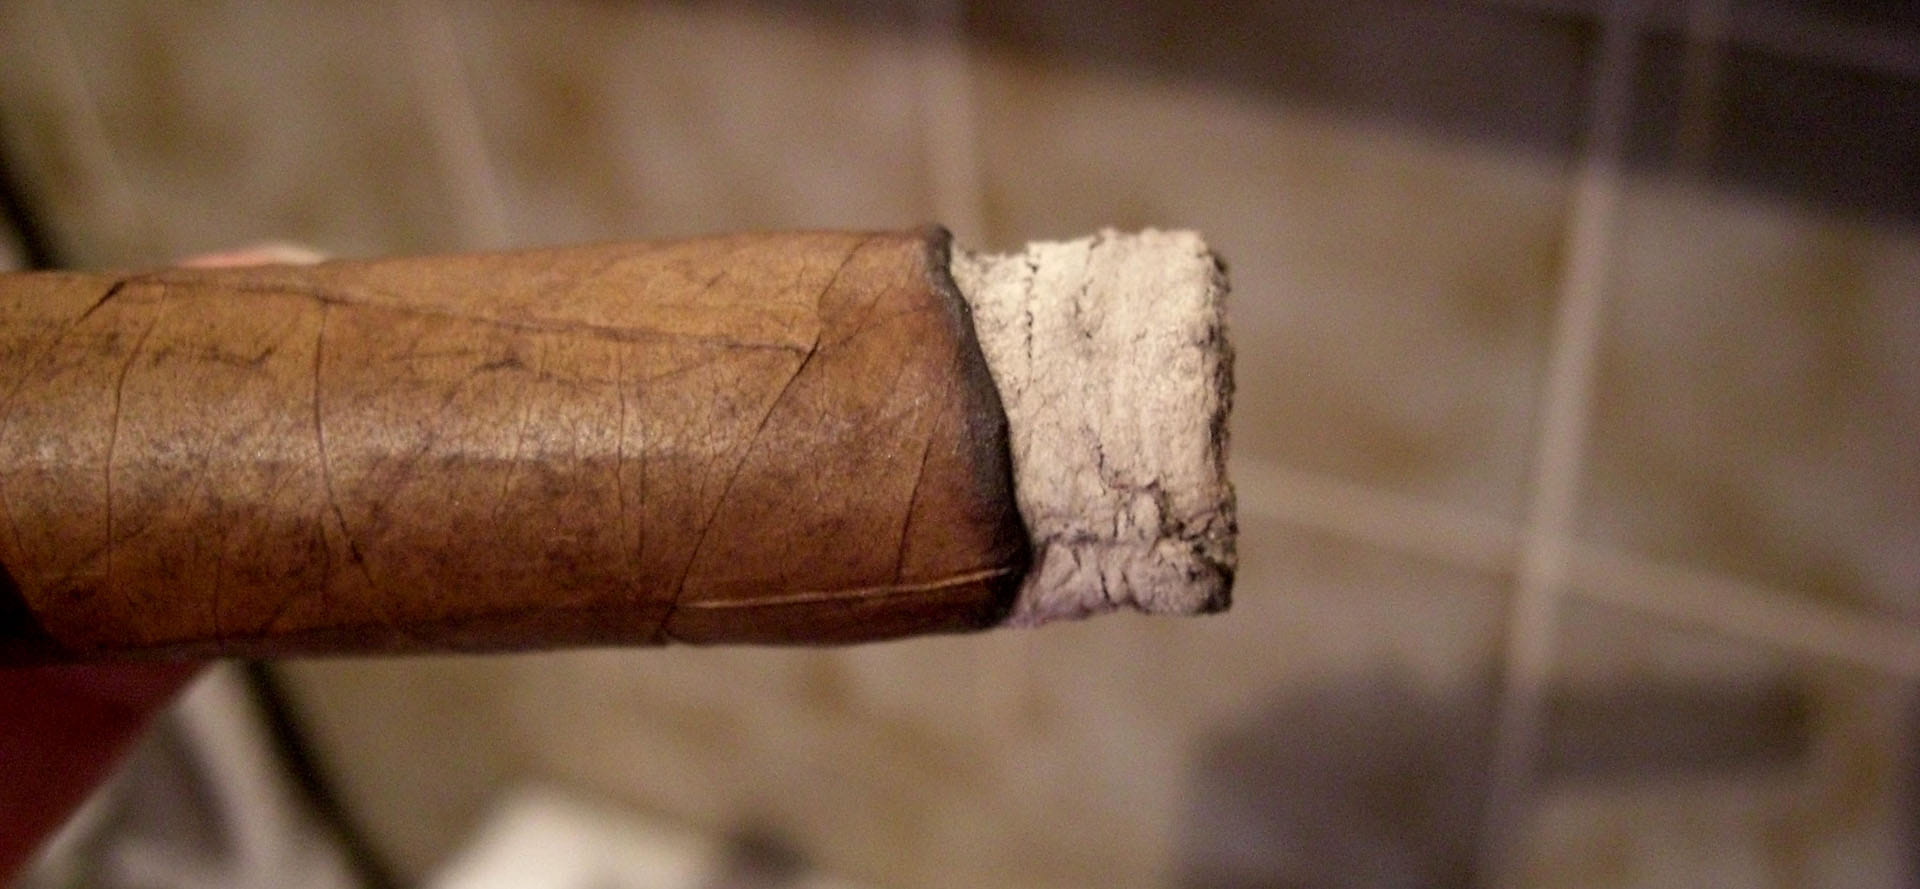 Smoldering Cigar with Ashes